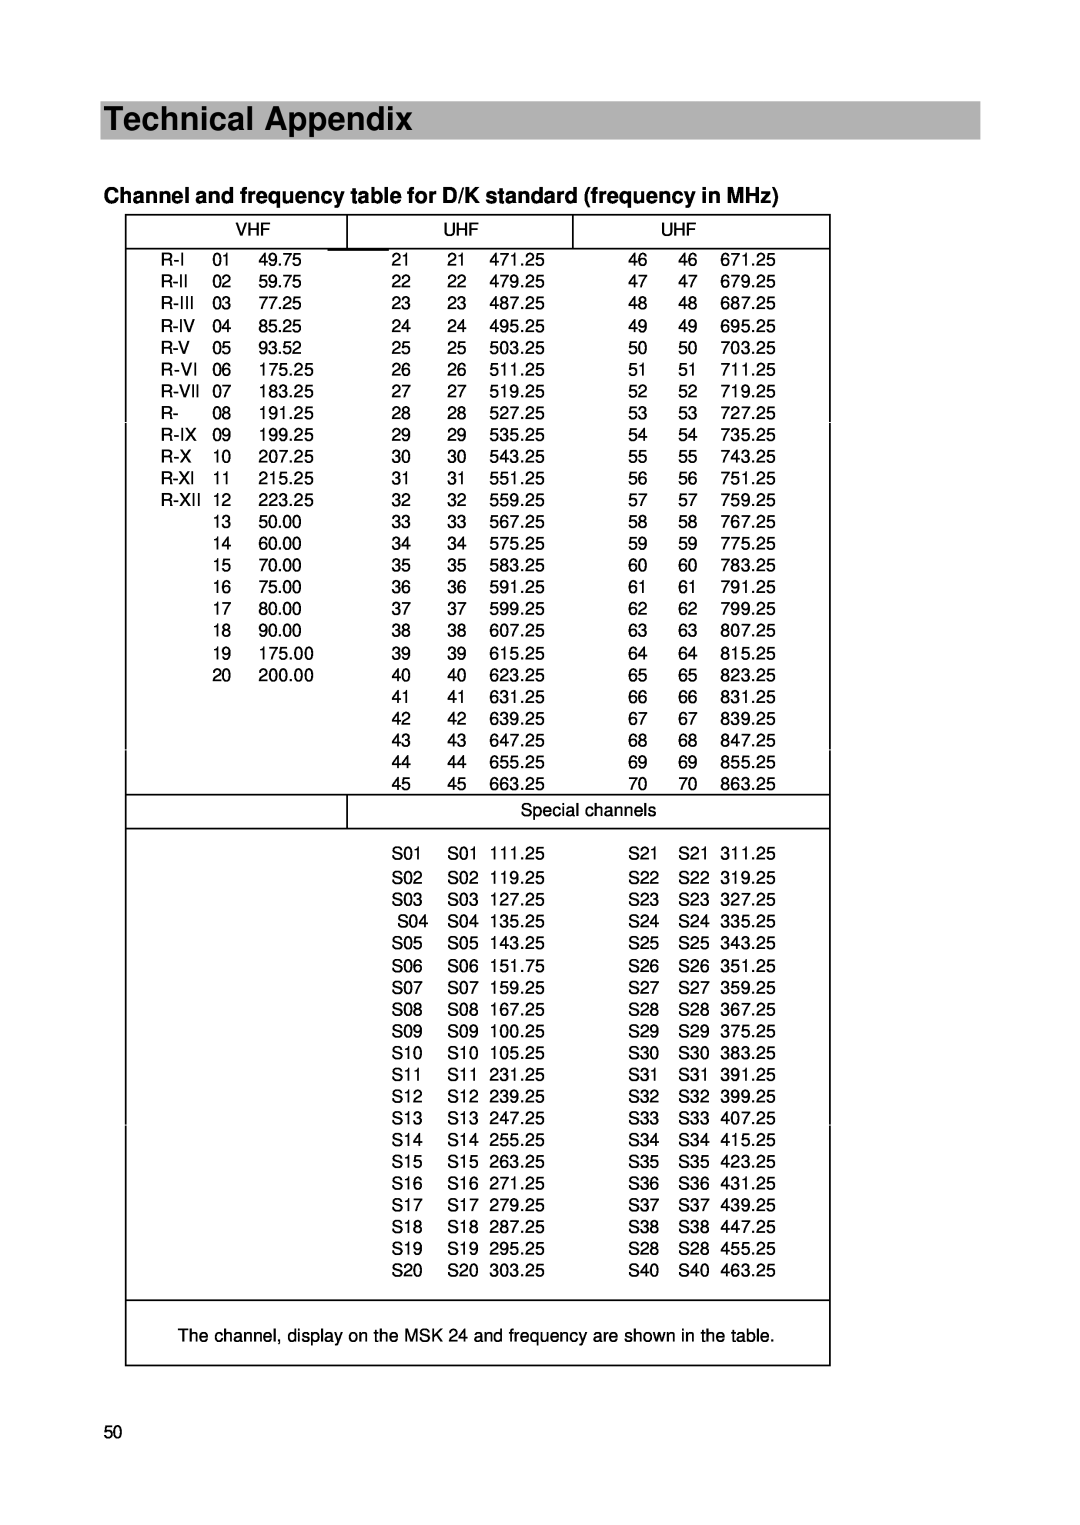 Kathrein MSK 24 manual Channel and frequency table for D/K standard frequency in MHz, Technical Appendix 